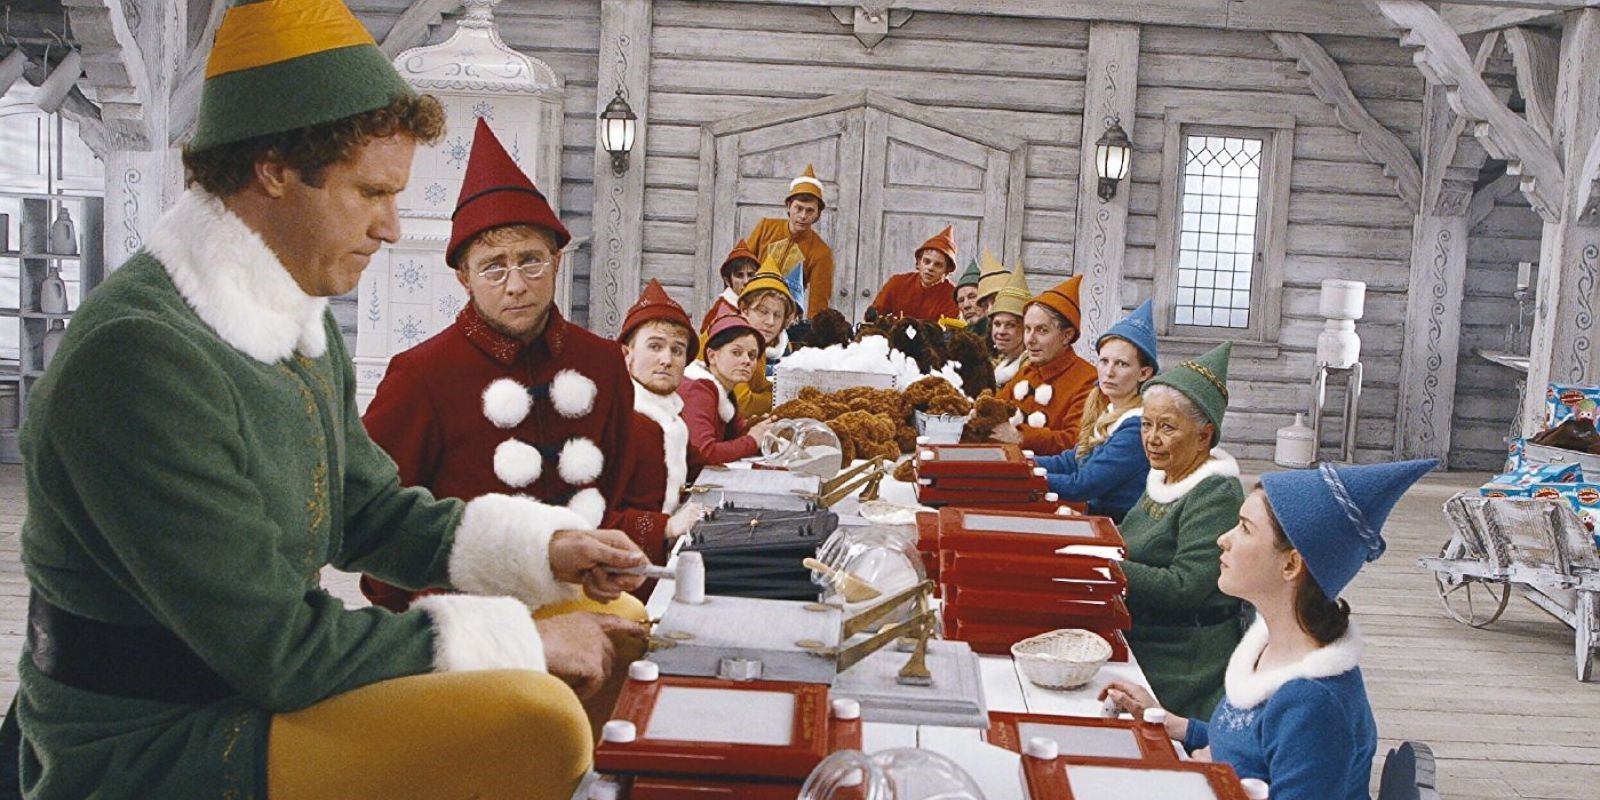 Buddy (Will Ferrell) and the elves making Etch-a-Sketches in Elf